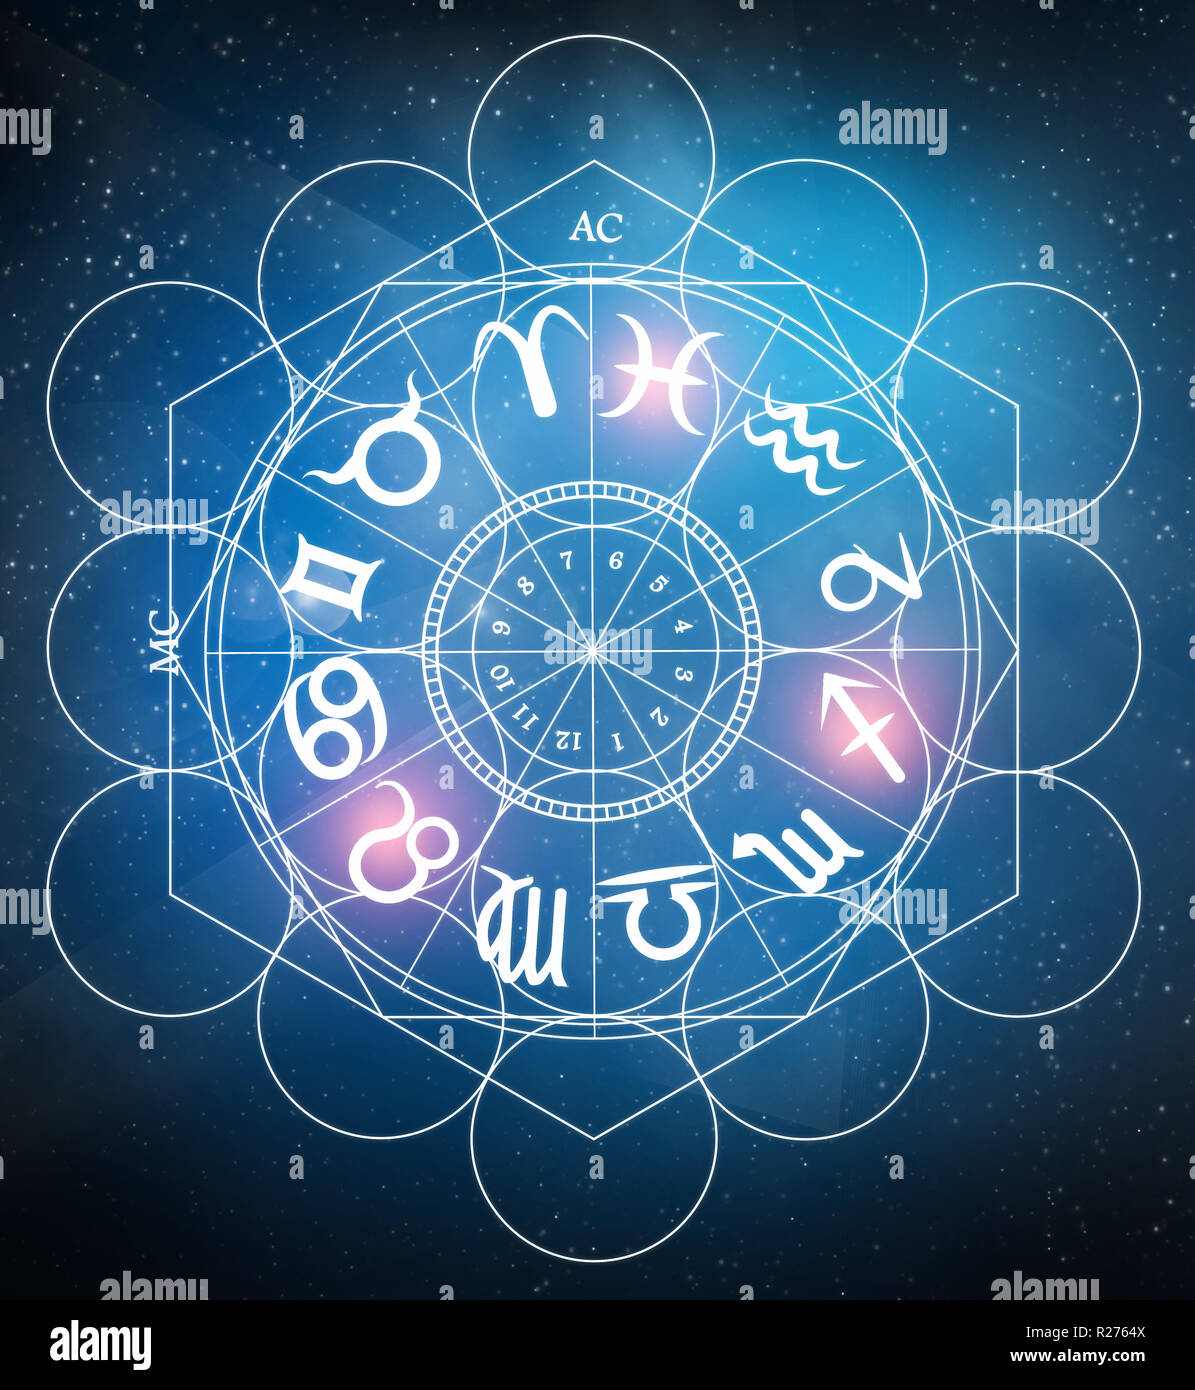 zodiac signs astrology concept Stock Photo